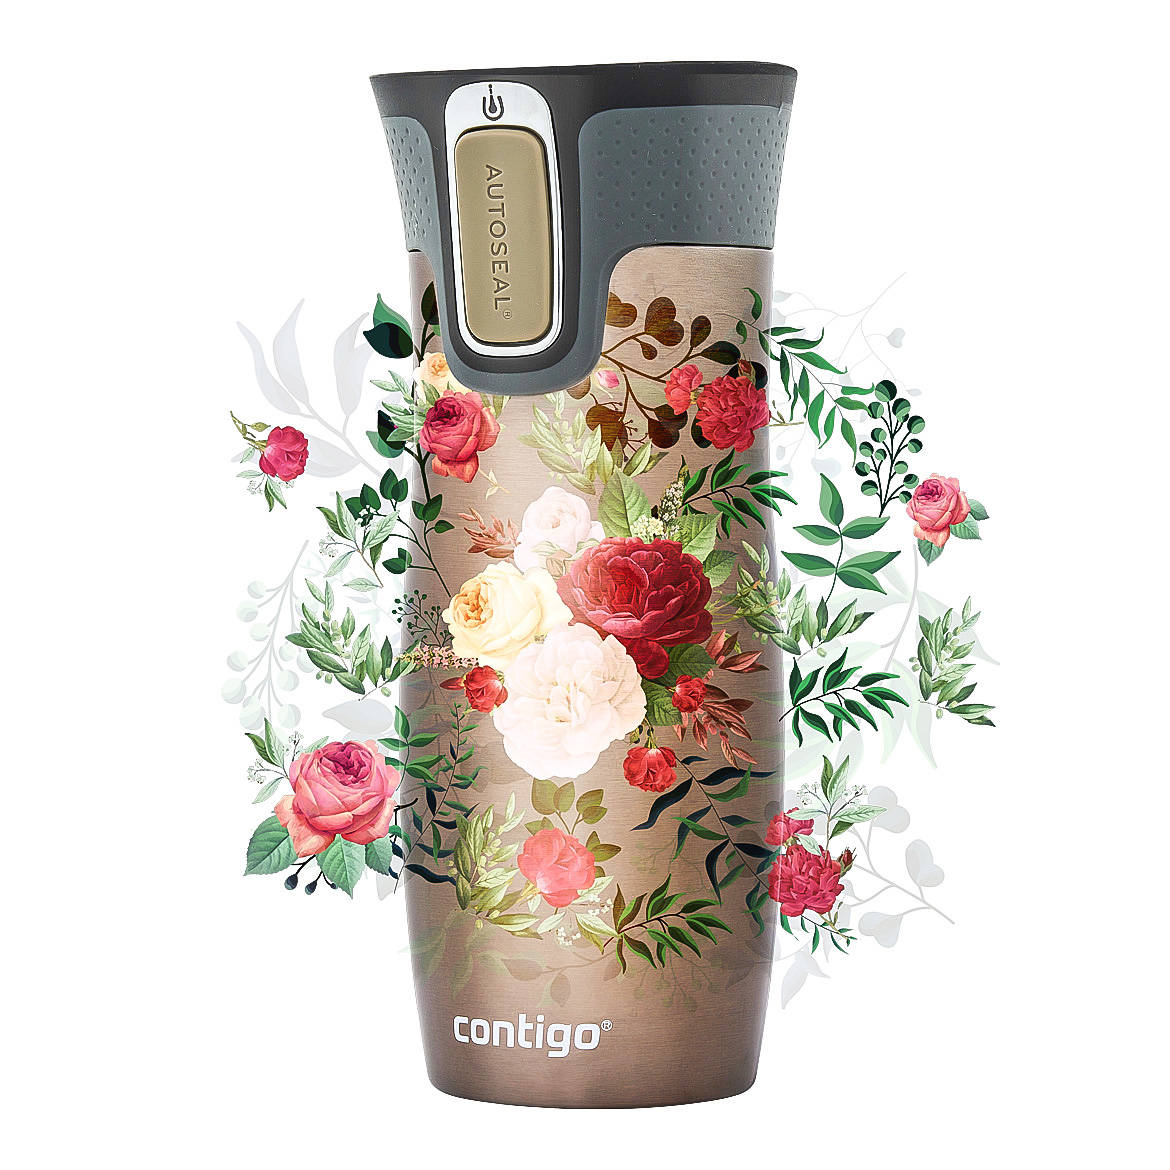 Thermal Mug Contigo West Loop 2.0 470 ml - Glamour Pink Pink Matte, Thermal  Mugs New Categories \ SHOW ALL FOR HER Collections \ GLAMOUR Collections  \ SHOW ALL Categories \ FOR HER